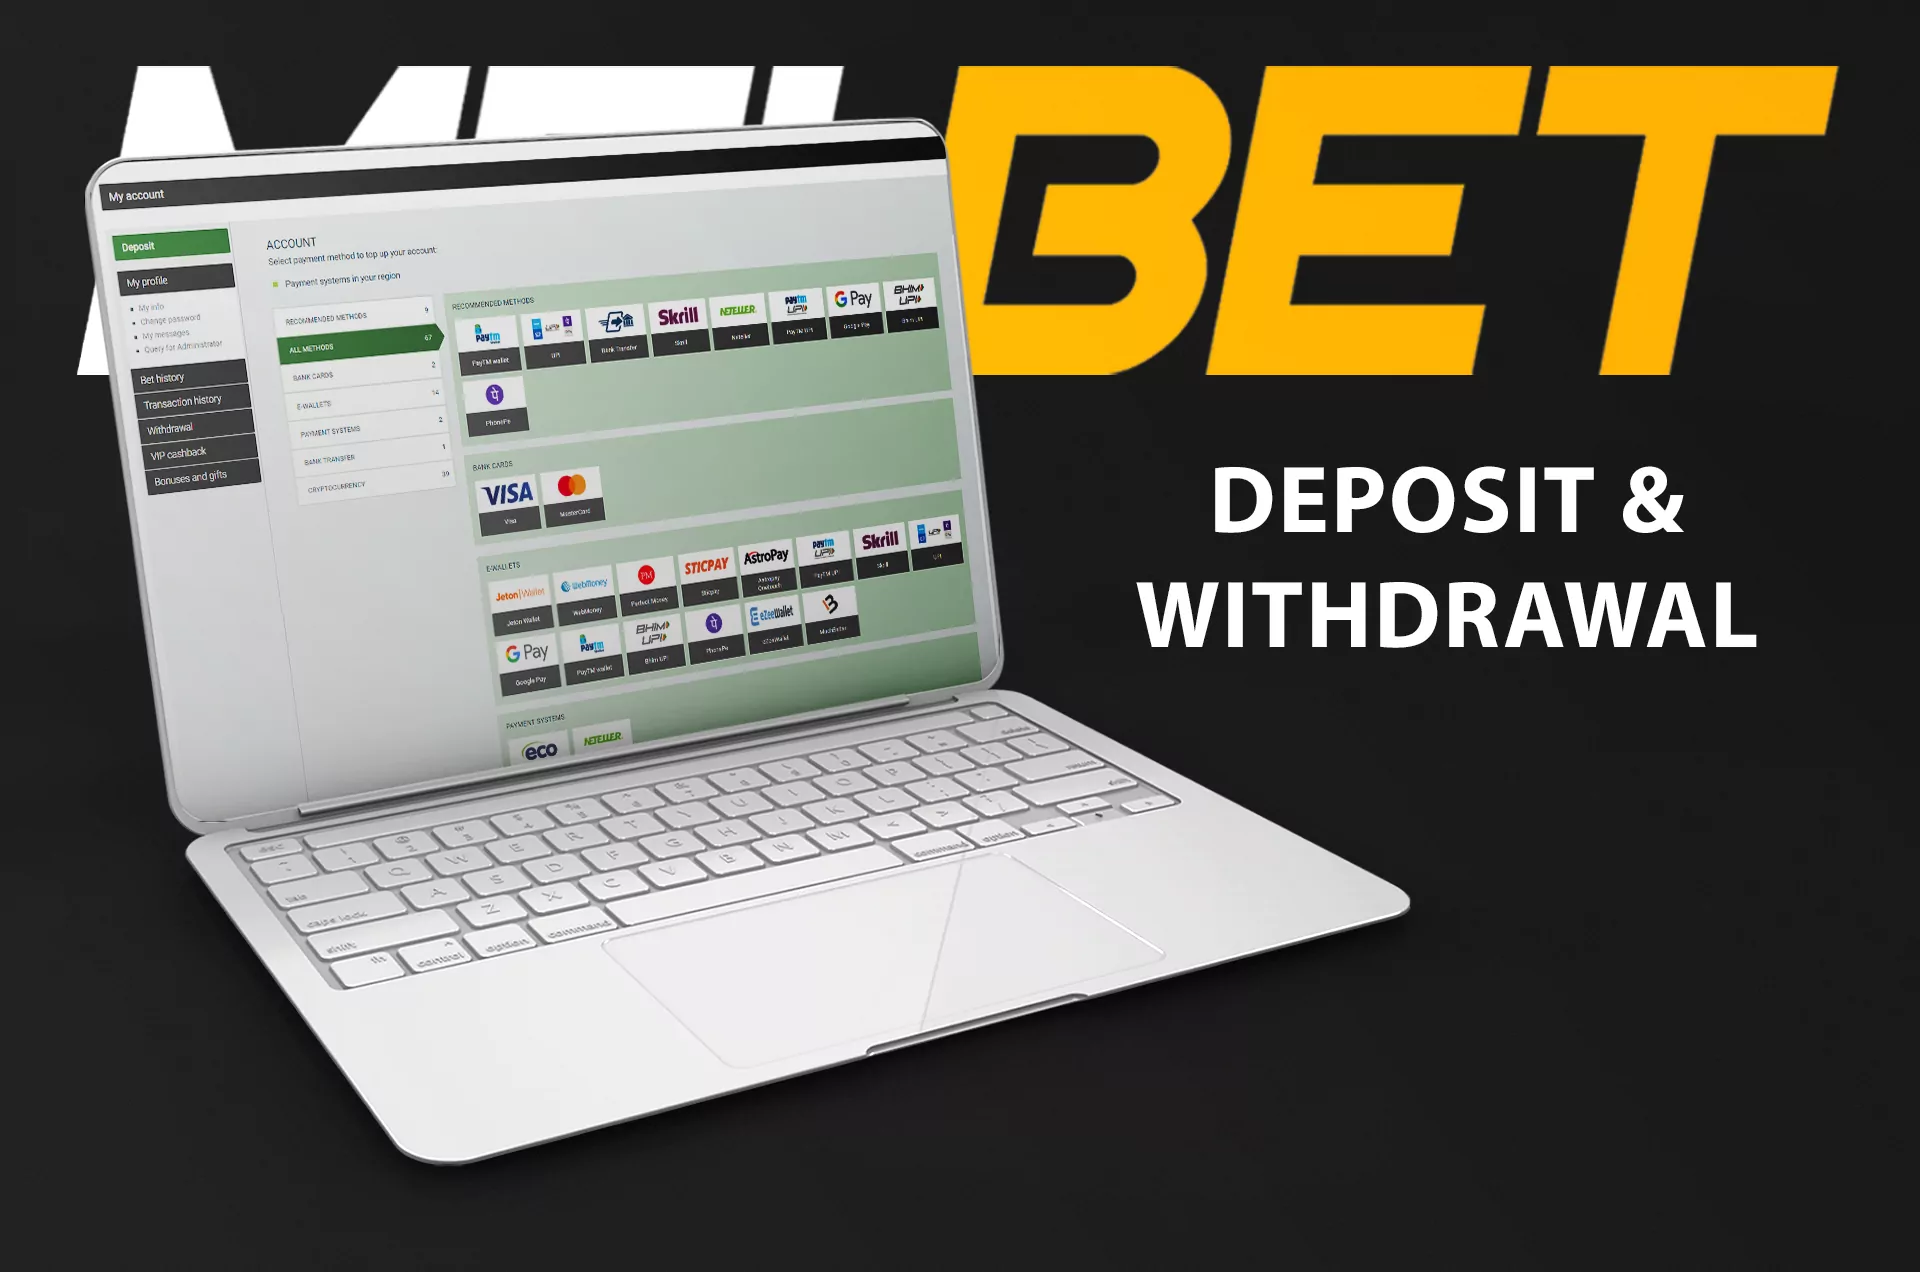 There are more than 50 available payment methods to deposit and withdraw money at Melbet.